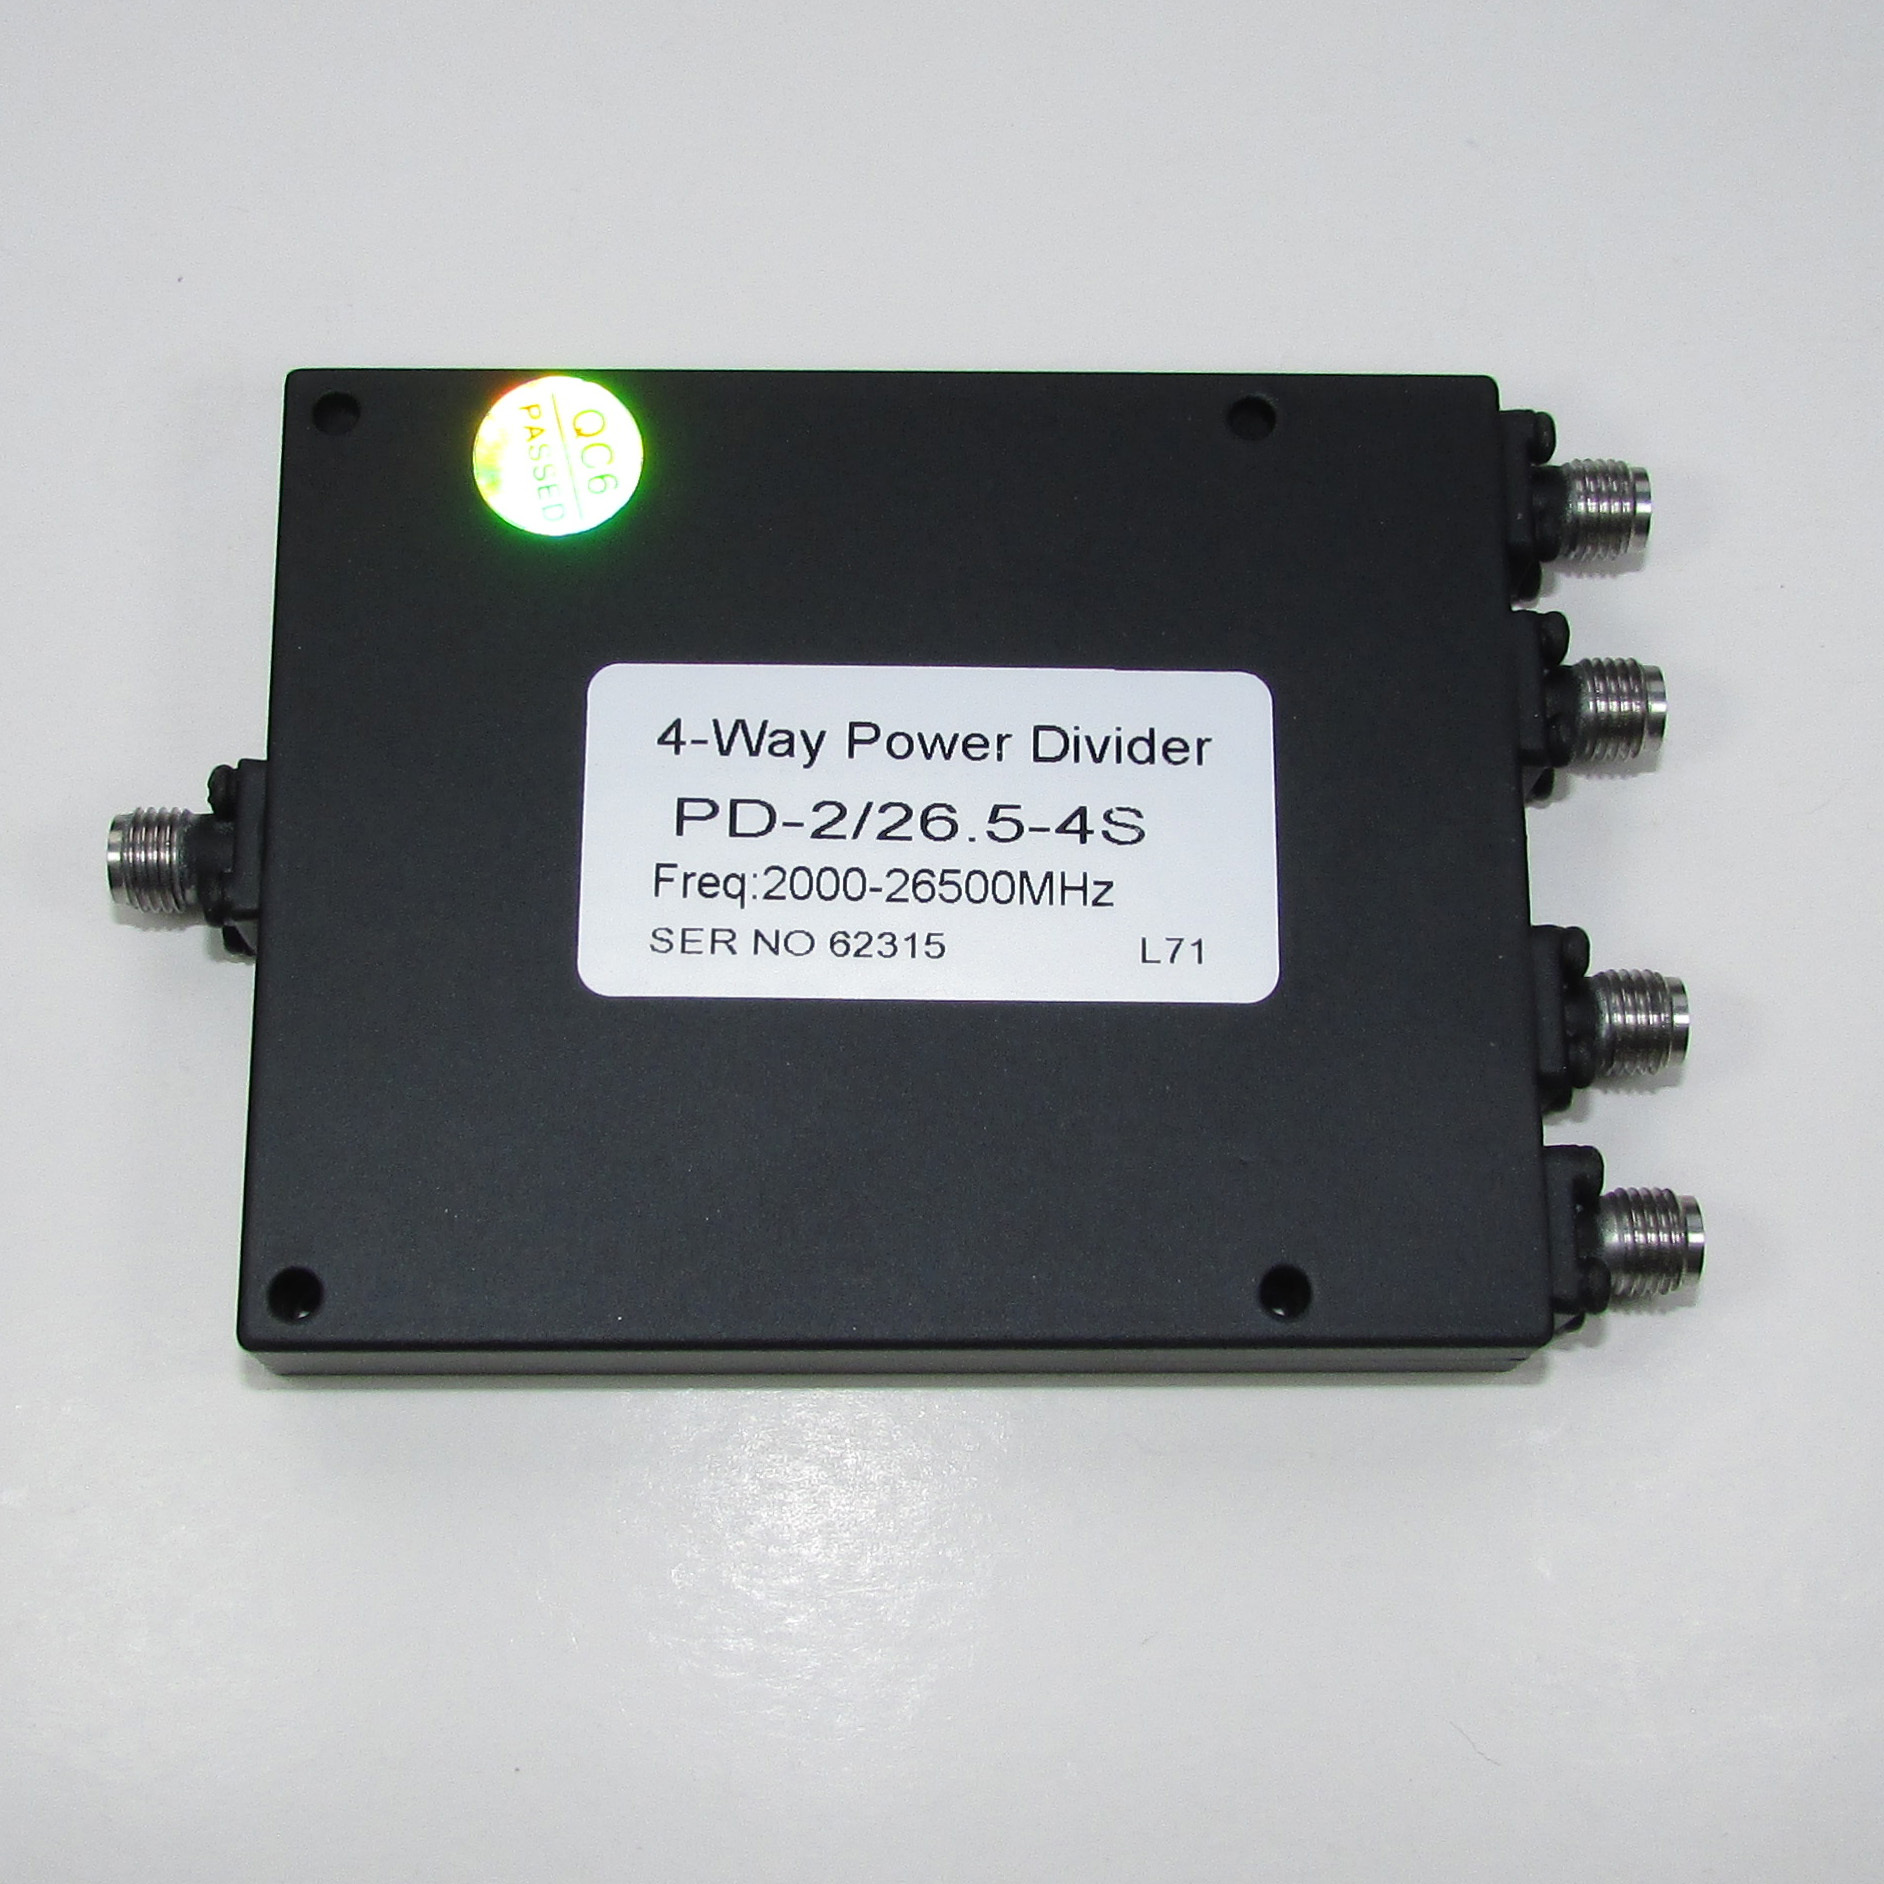 PD-2 / 26.5-4S 2-26.5GHz 20W RF Microwave One Point Four Broadband Power Divider / One Year Warranty